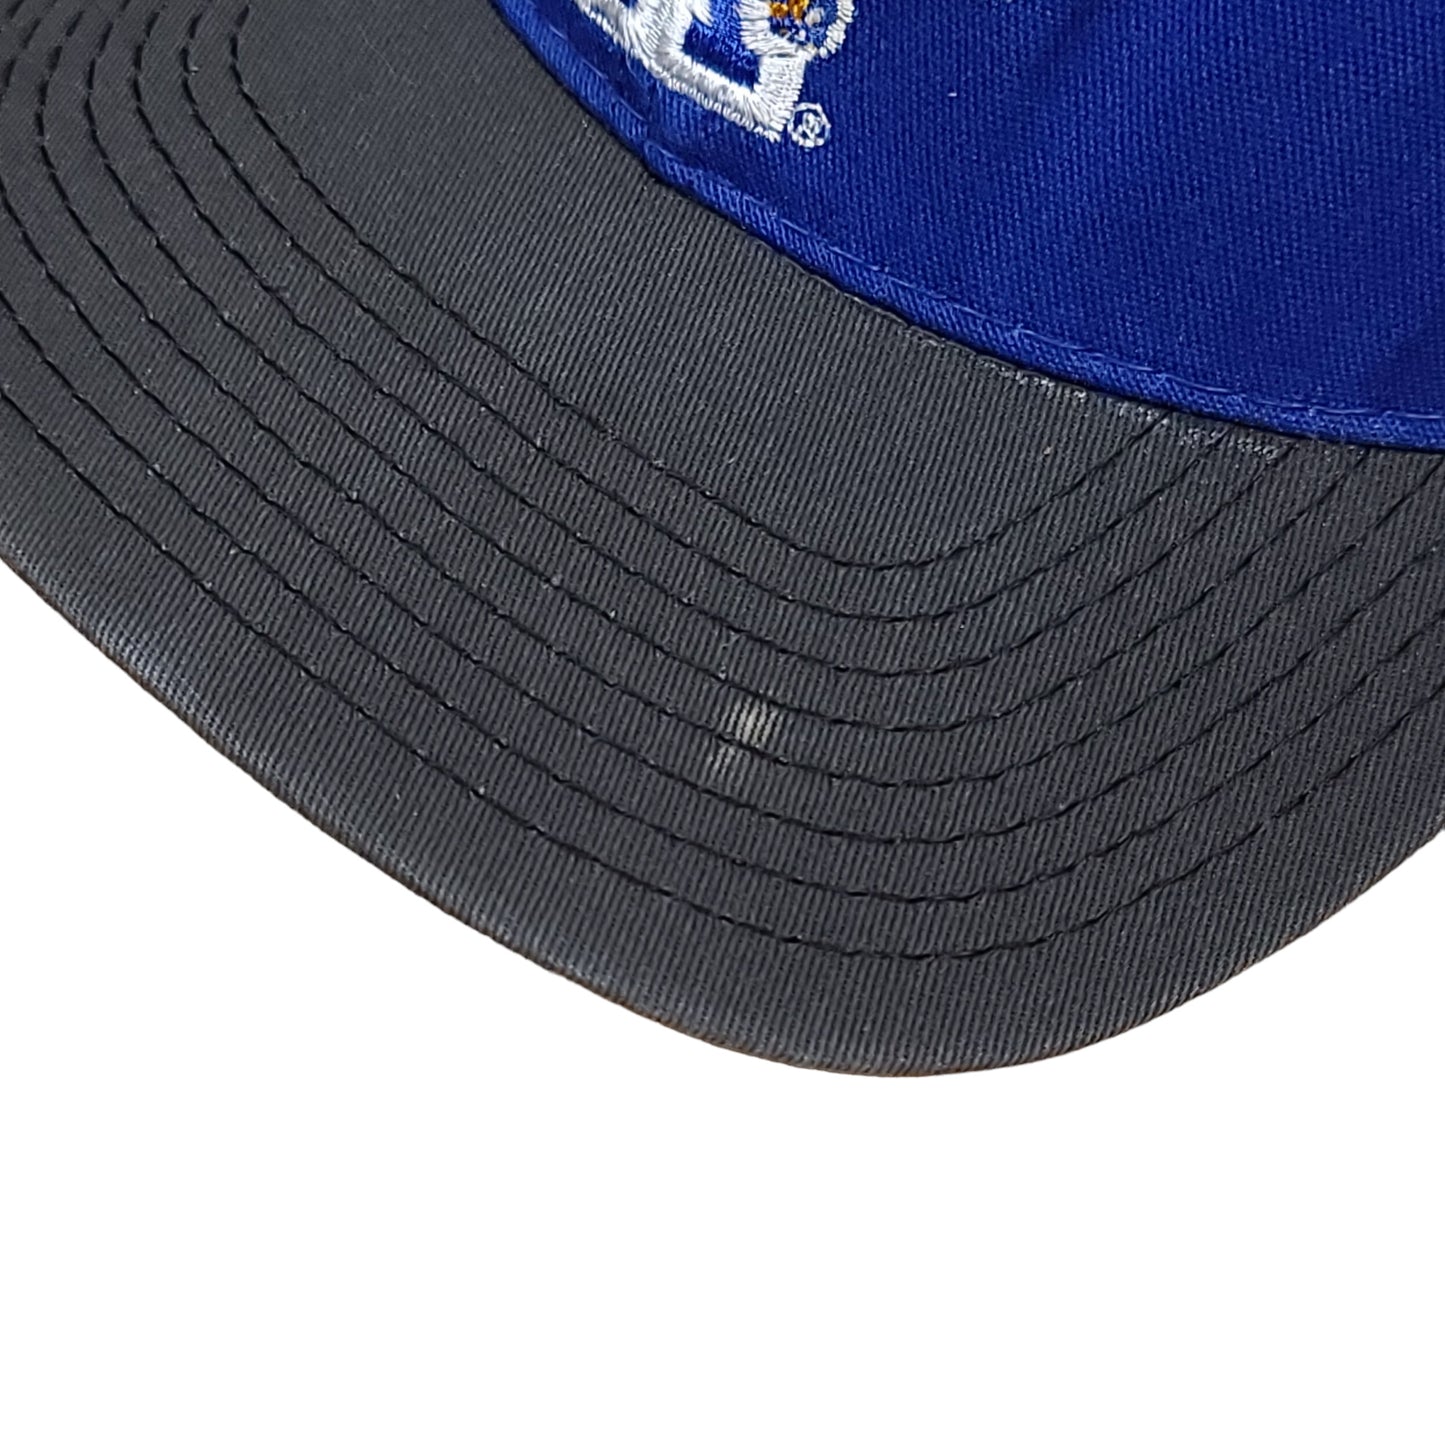 VIntage University of Kentucky Wildcats 7 Fitted Hat